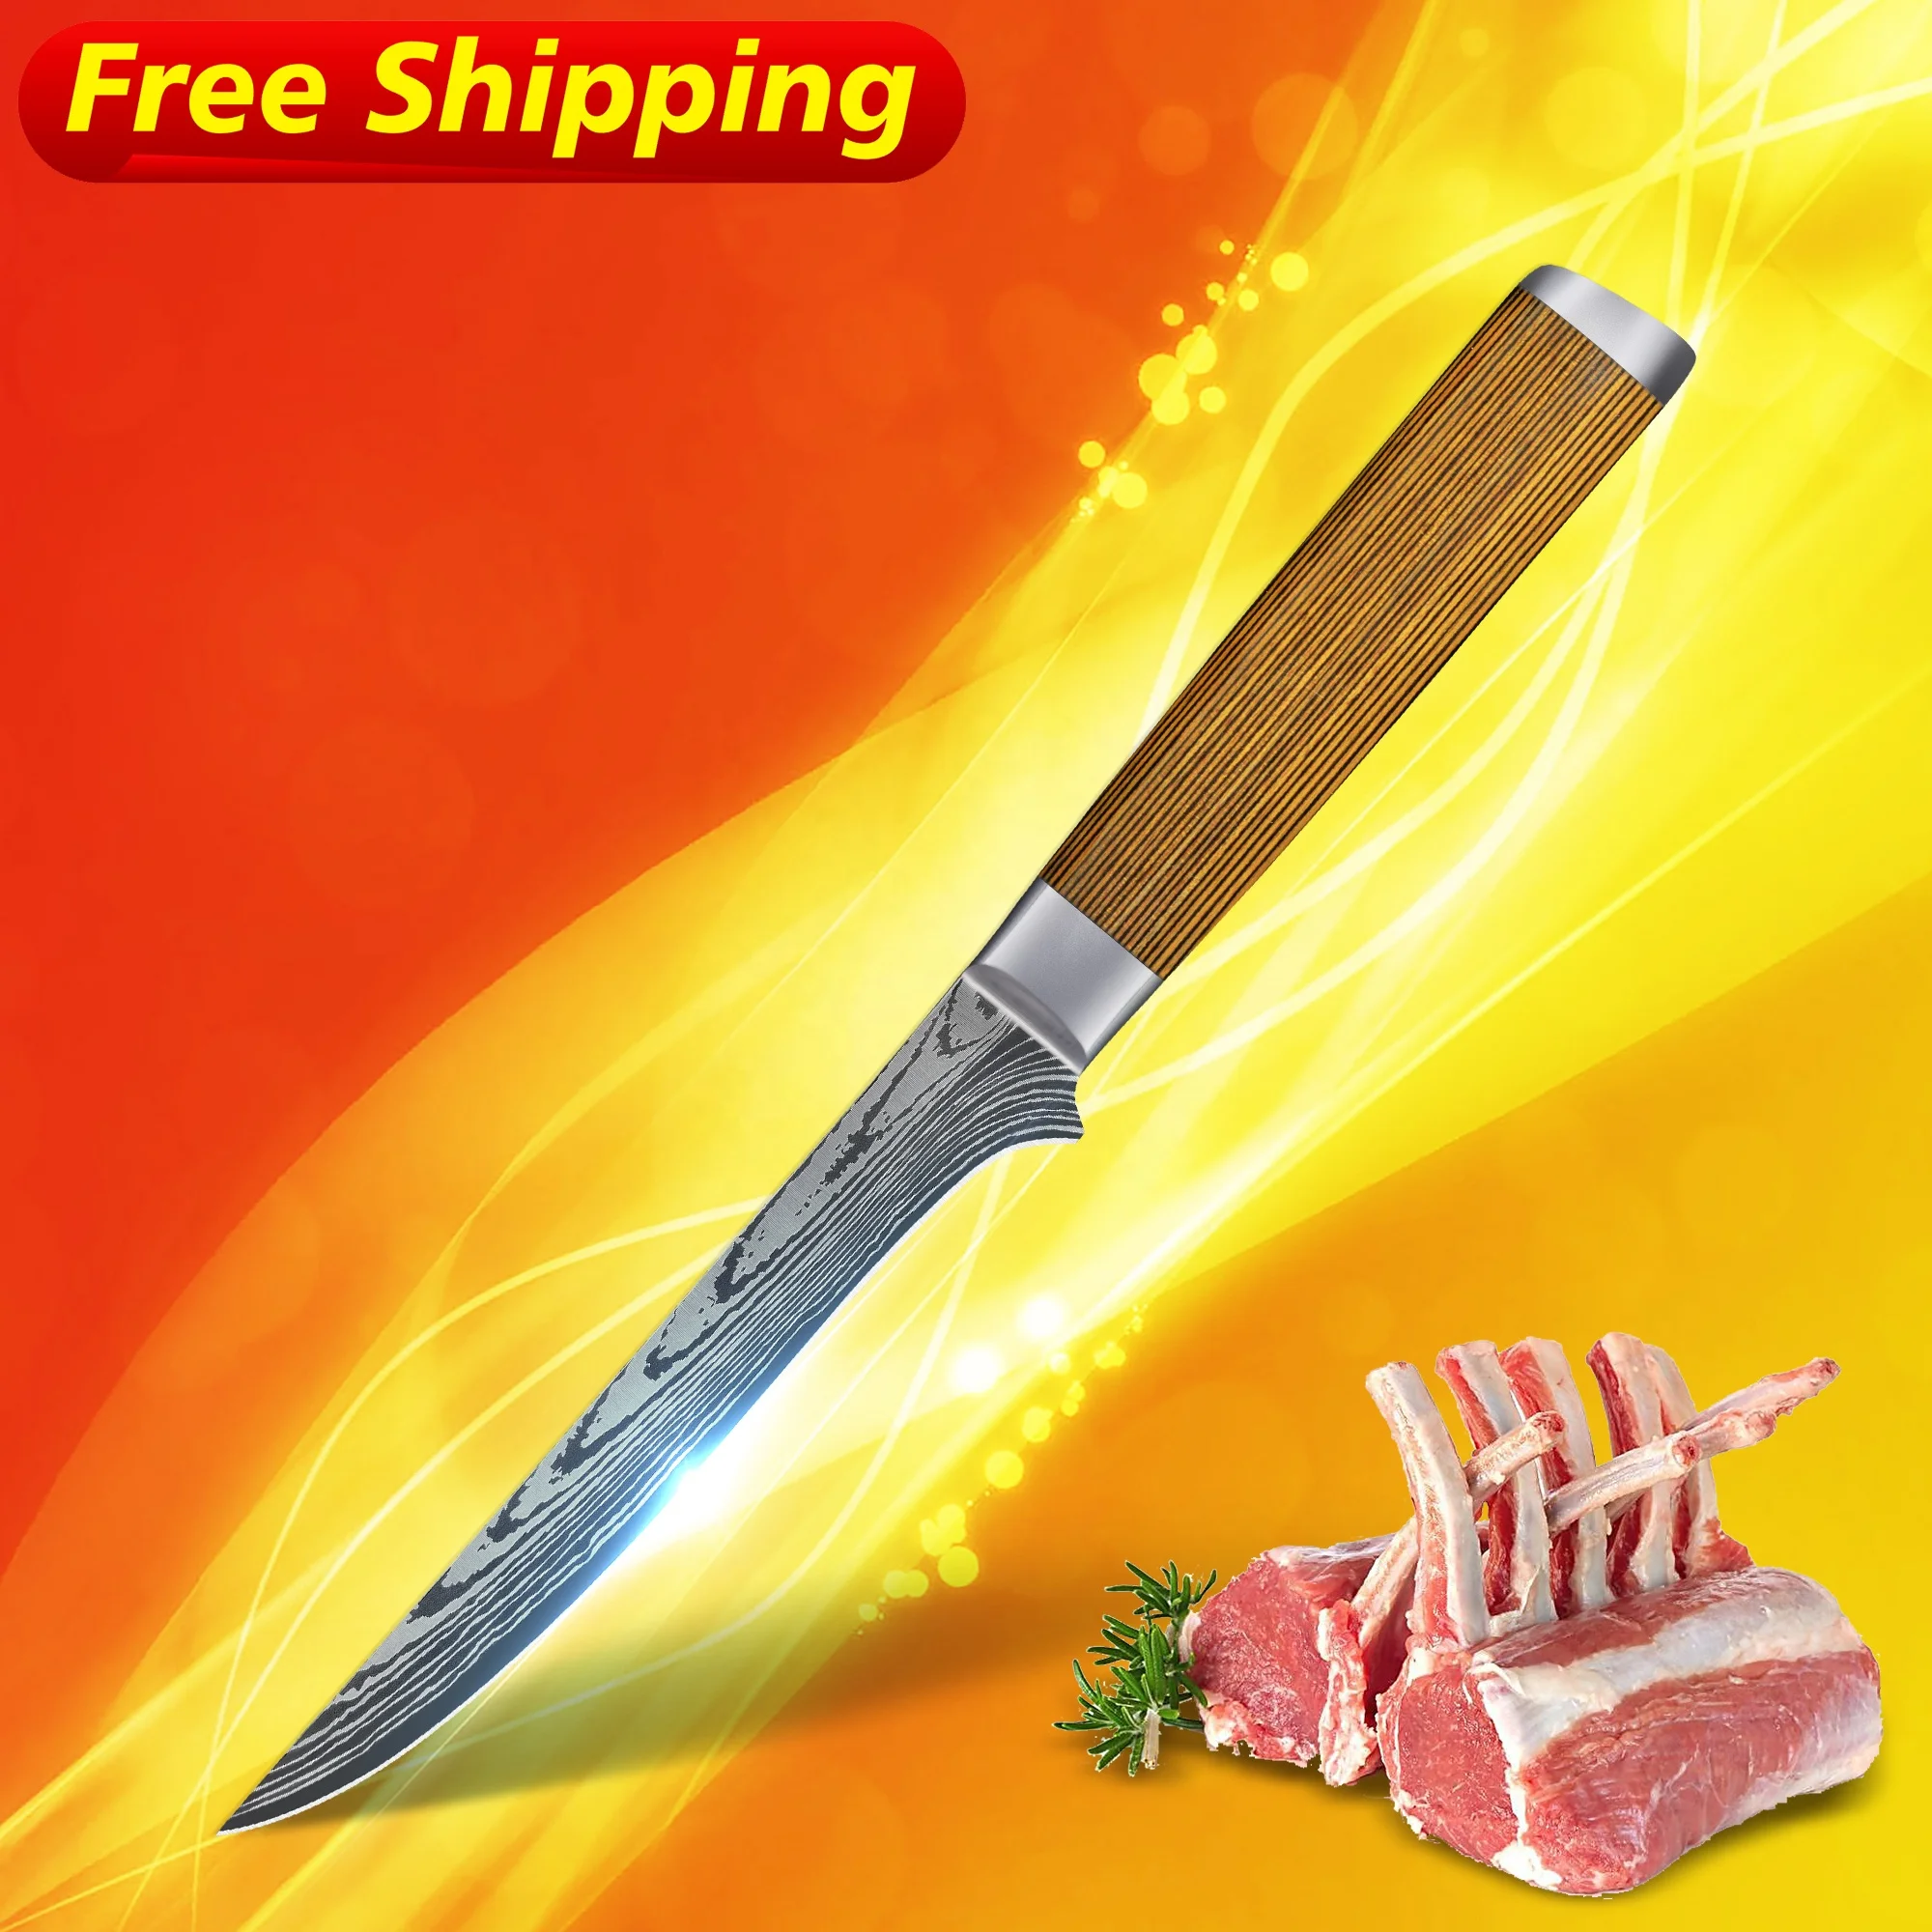 

Free Shipping Yellow Pakka Wood 6 inch damascus long fillet knife fillet knife stainless steel boning knife by Skycook, Customized color